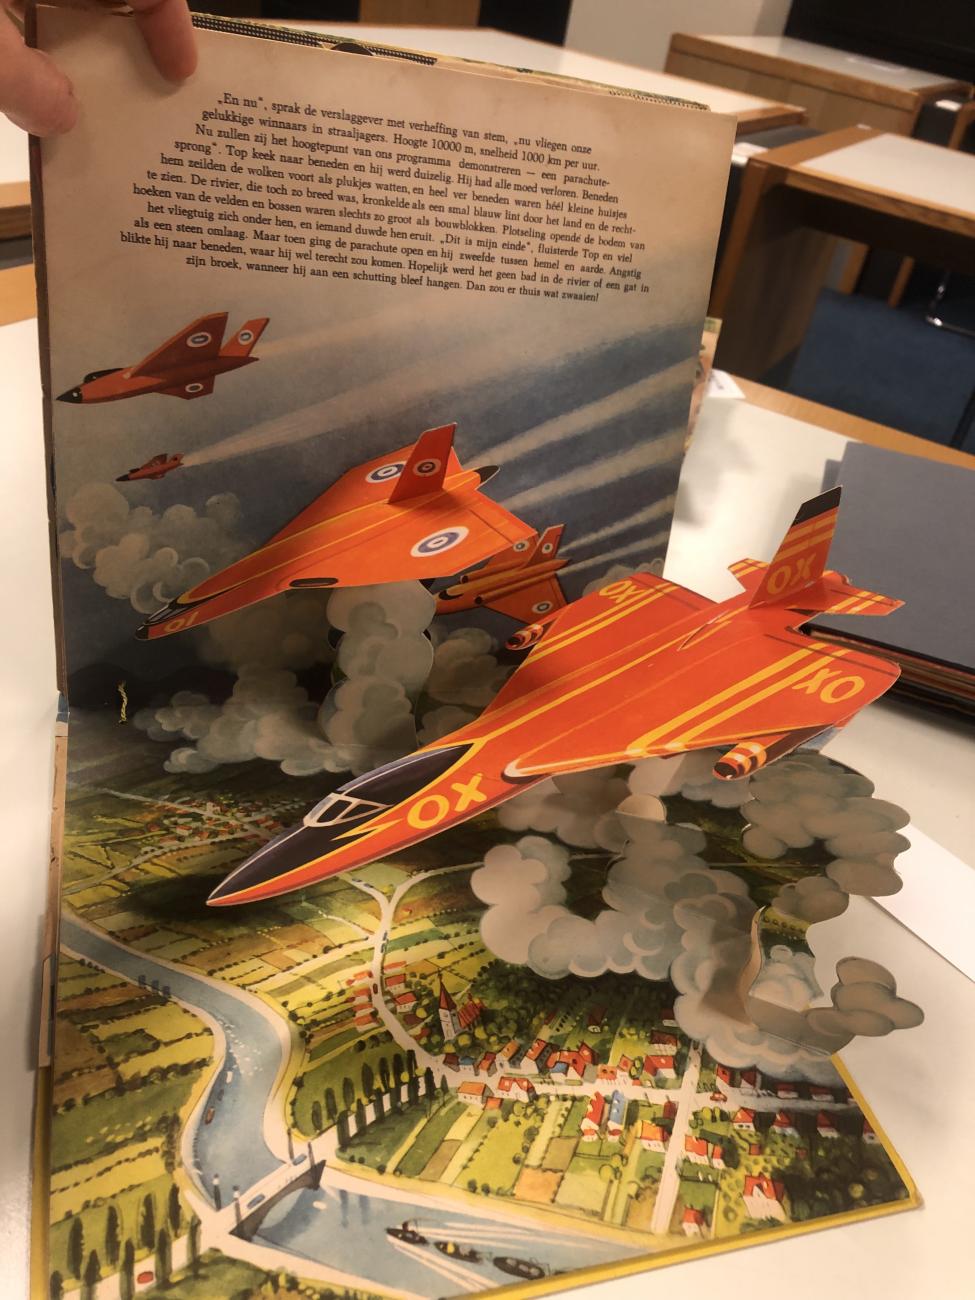 Pop-up book with planes